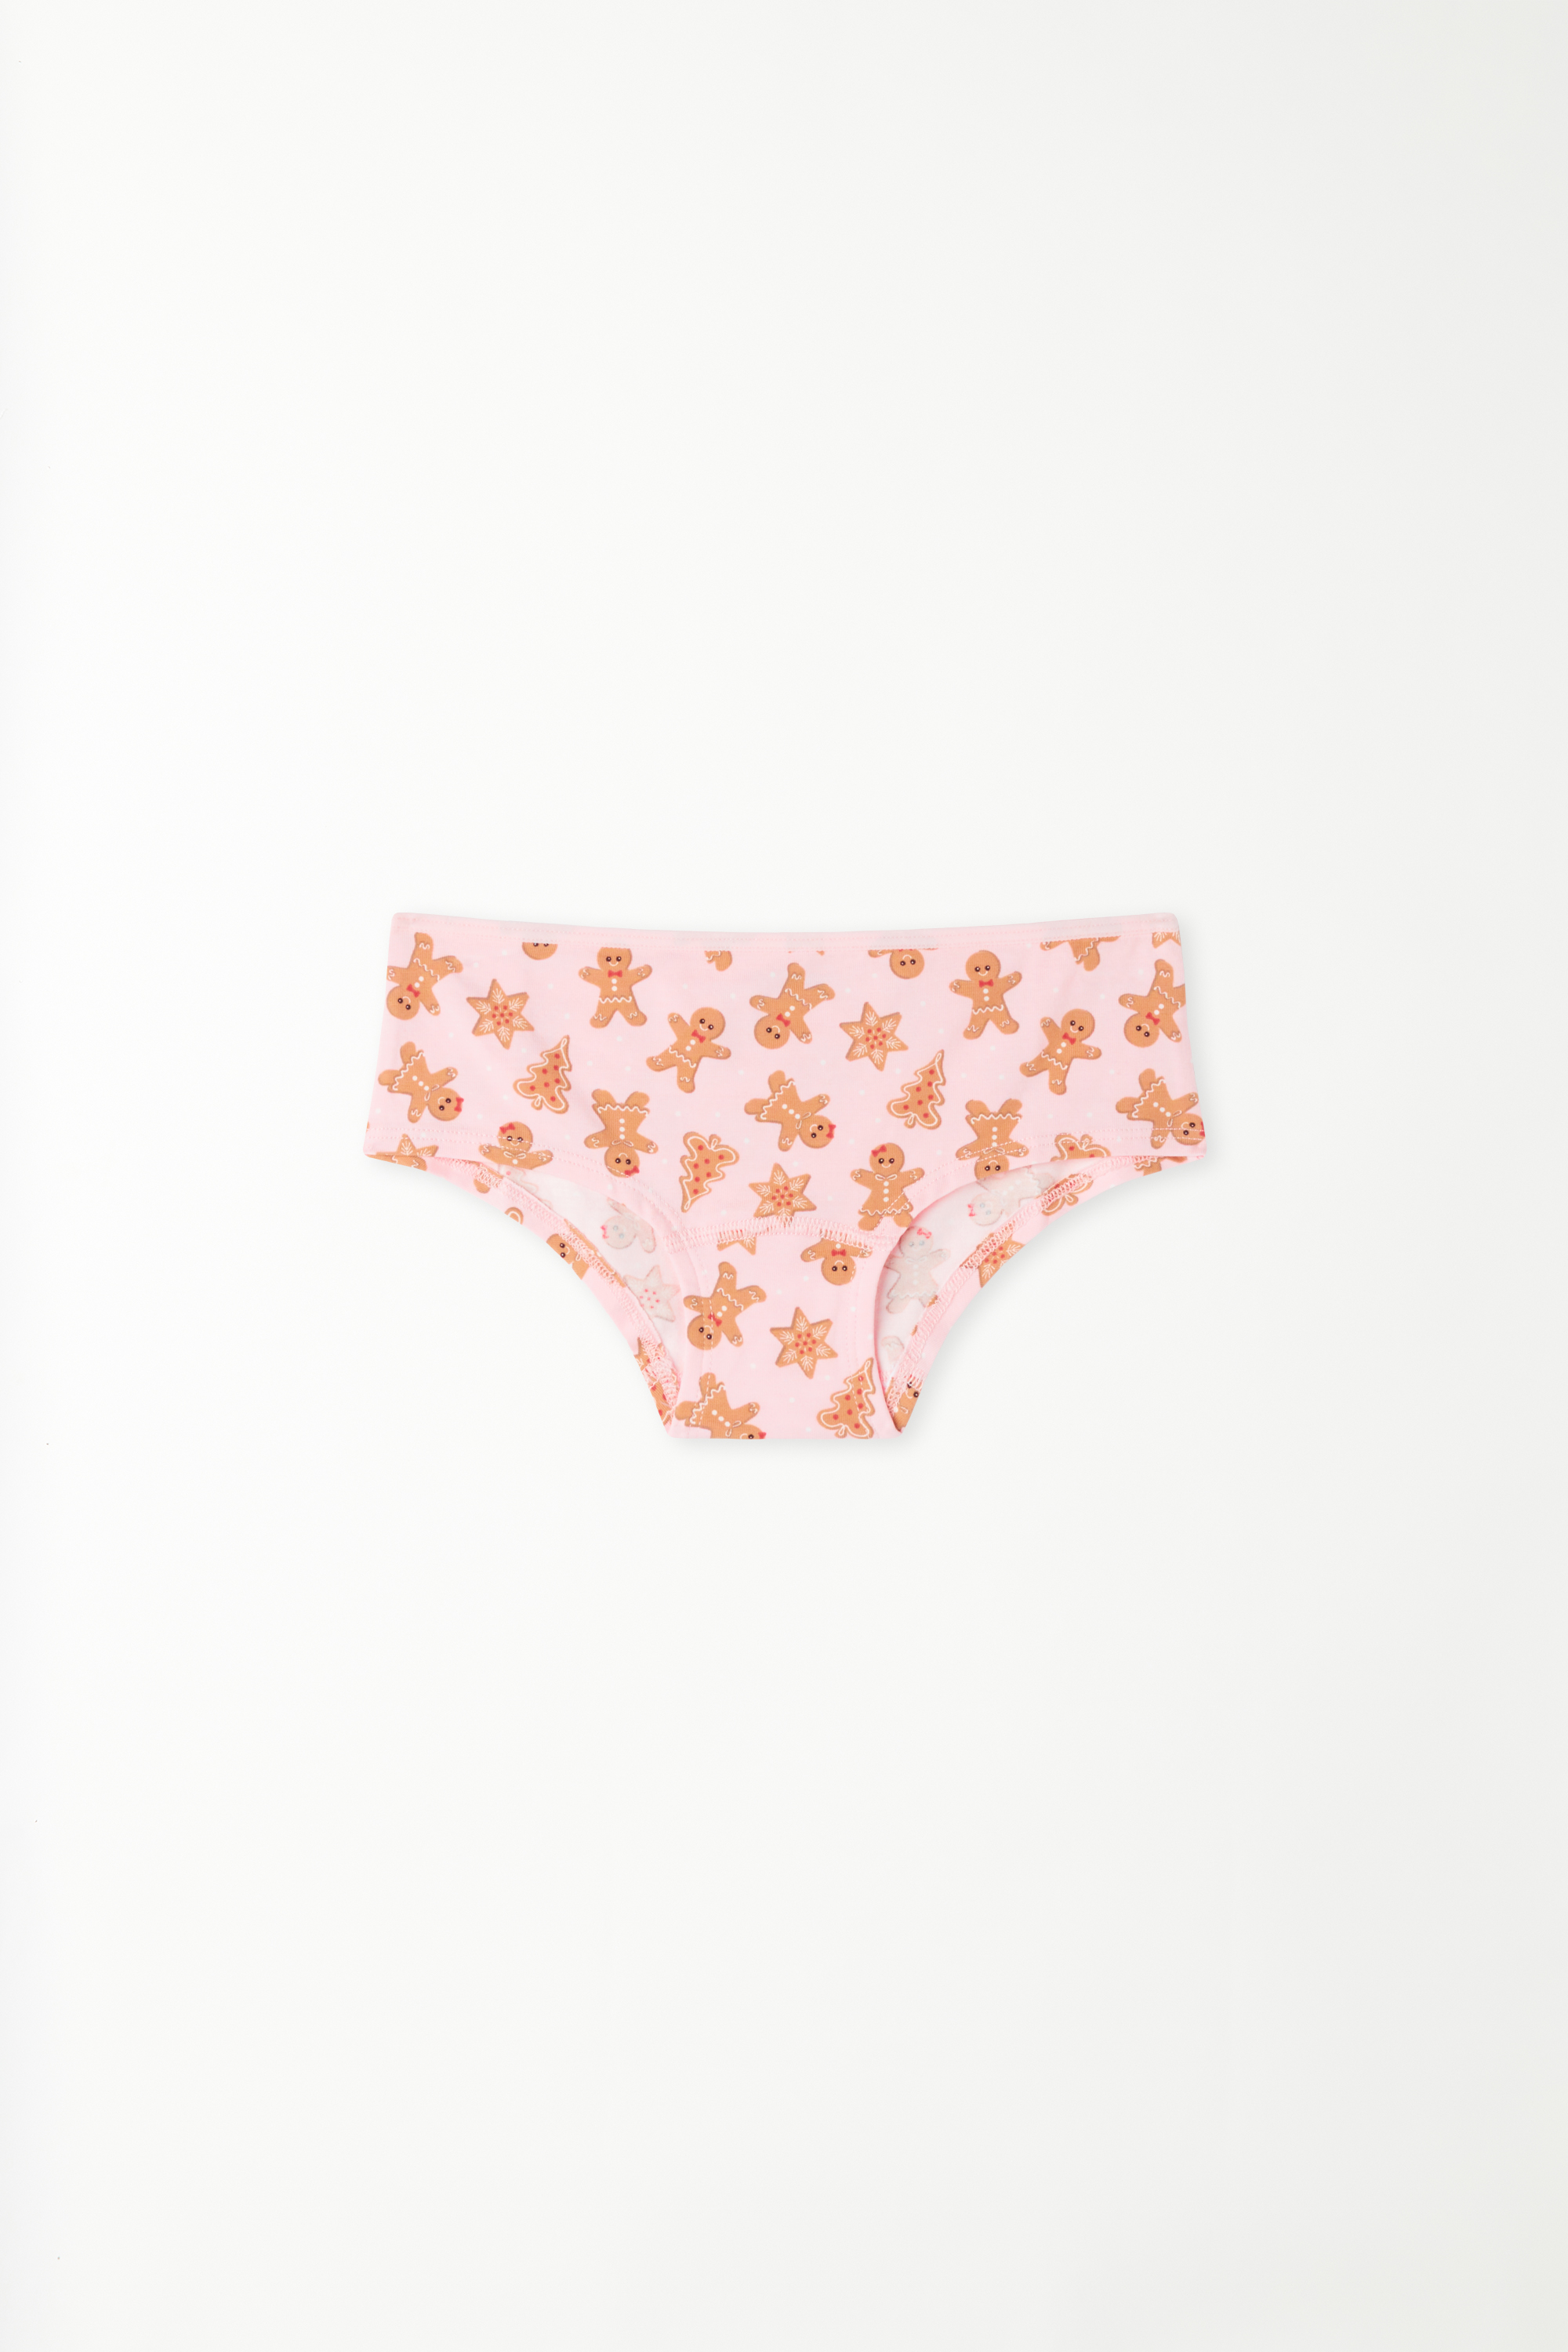 Girls' Cotton French Knickers with Christmas Print